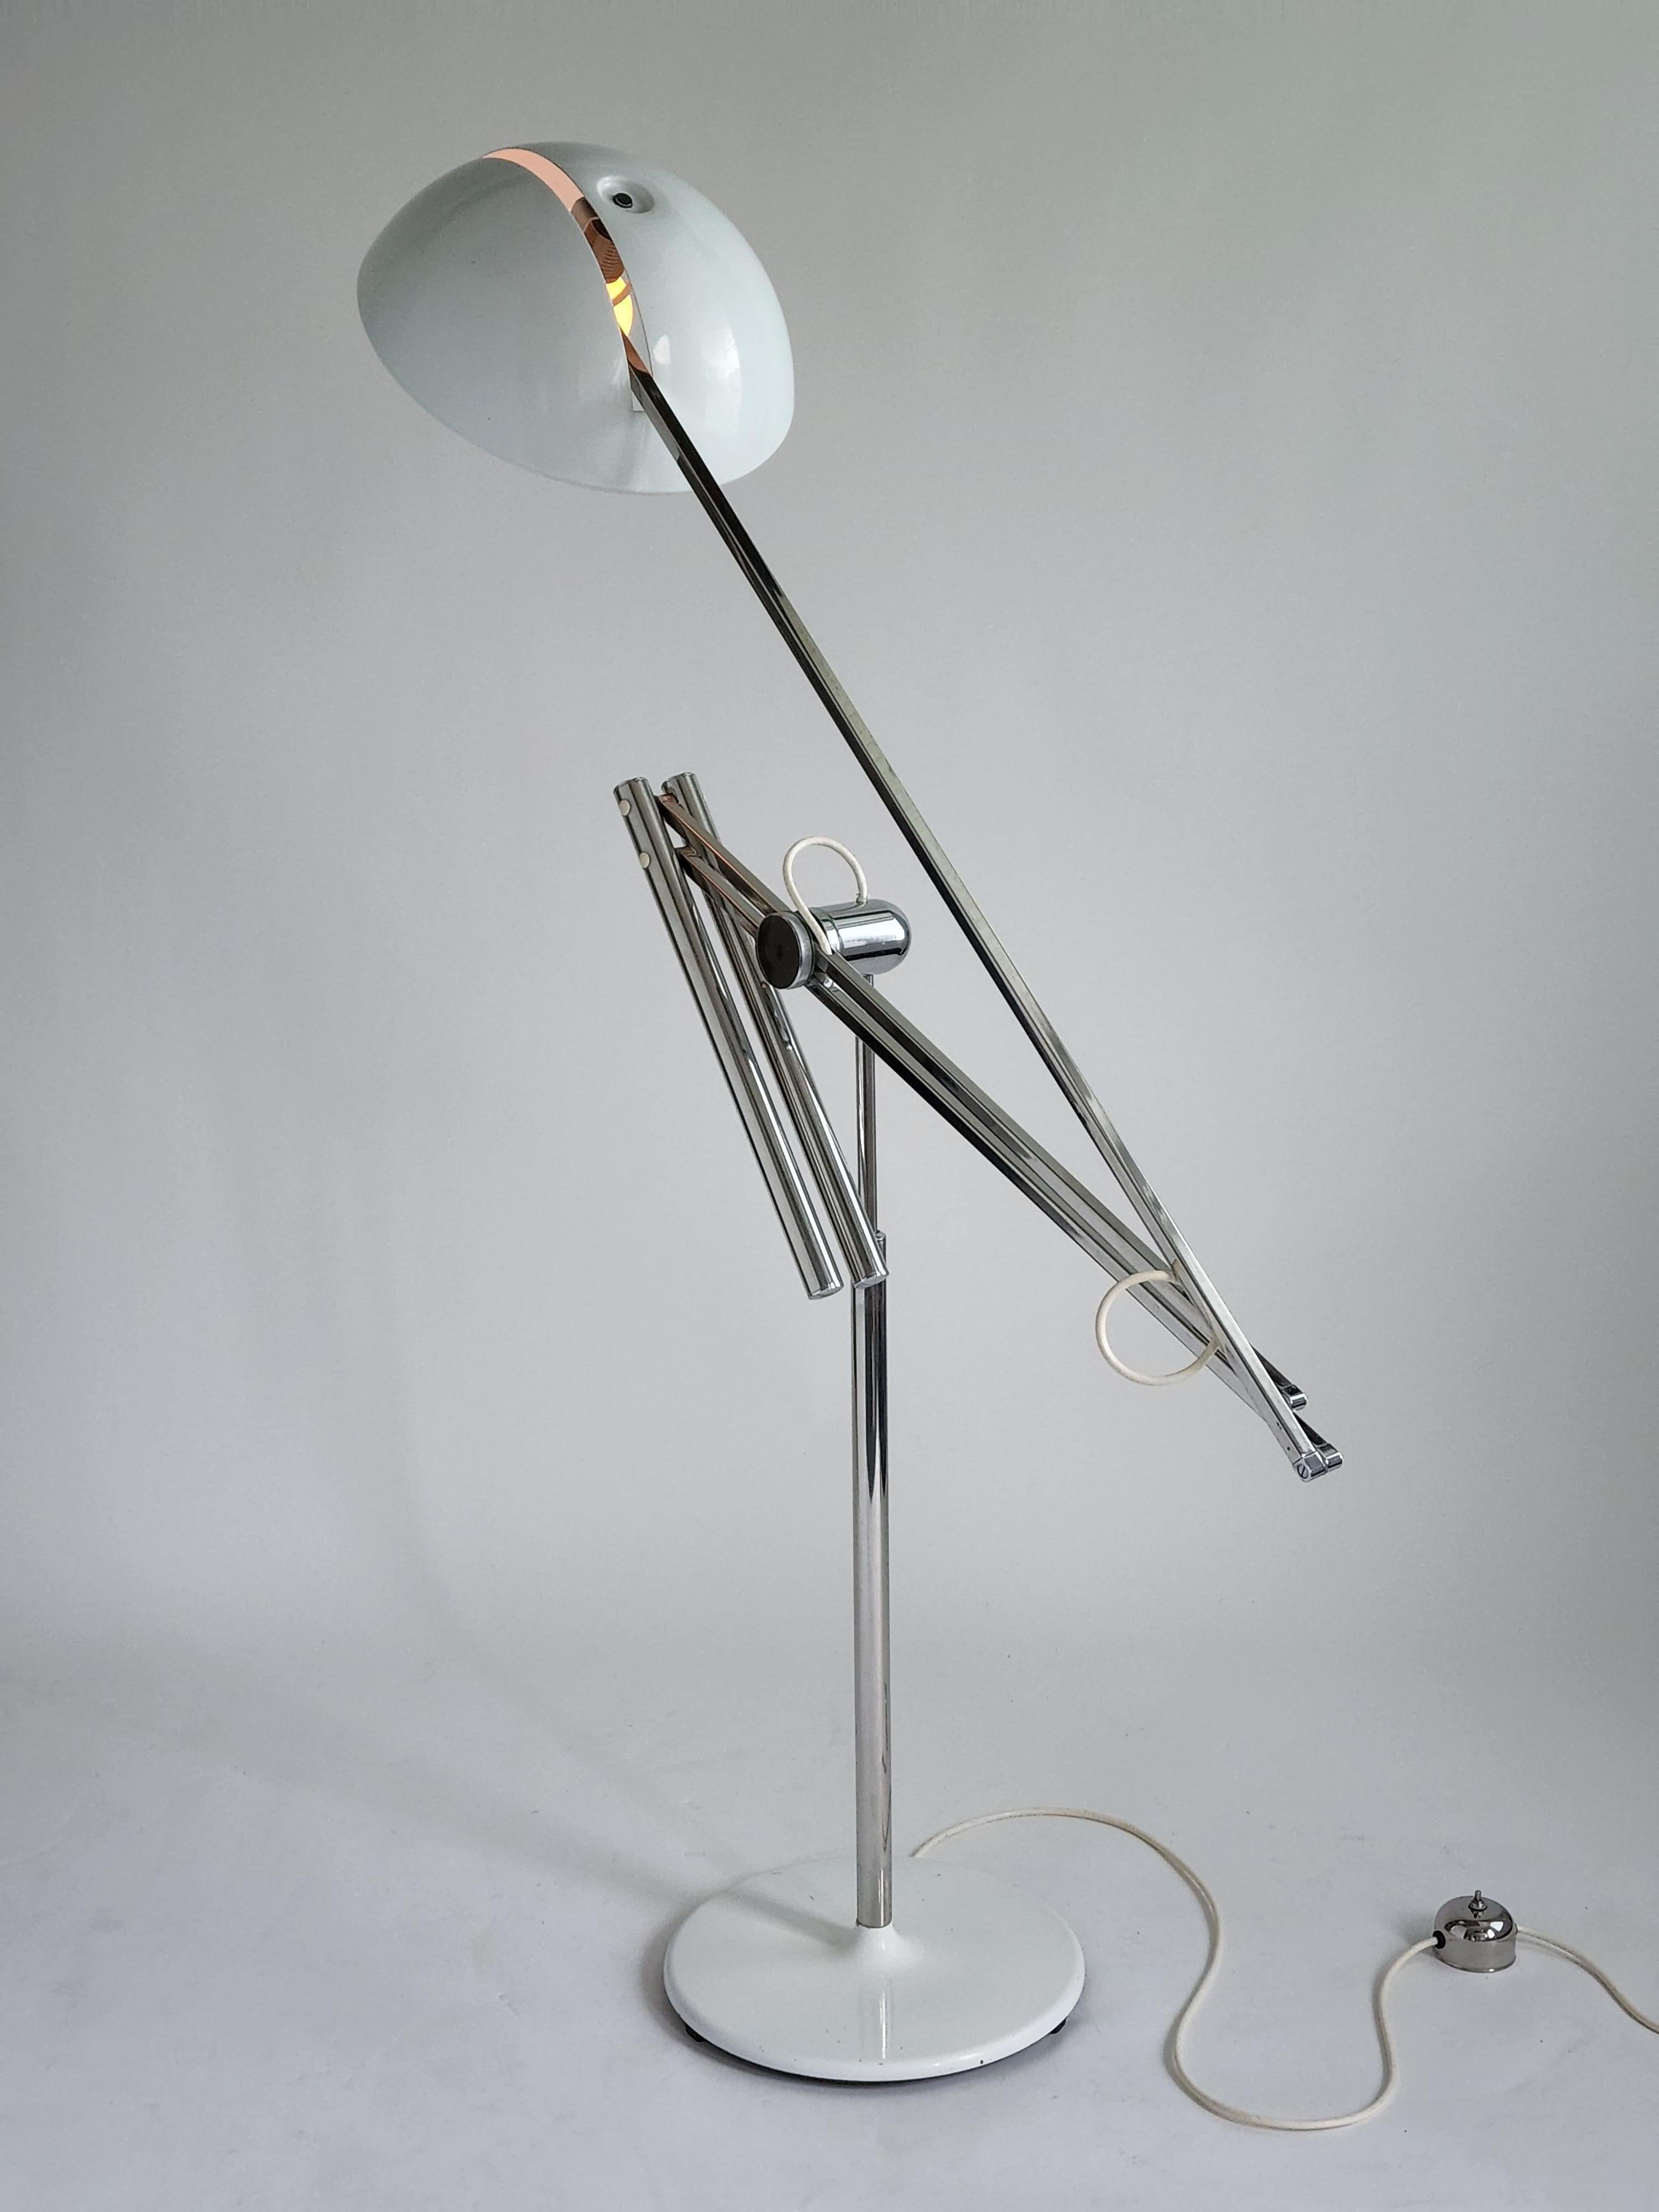 Rare massive cantilever / counterweight floor lamp, model 633 from Reggiani. 

Well made sturdy construction. Counterweight mechanism works smooth and tight. See video. 

Shade measure 14 in. wide and flip 180 degree from downward reading